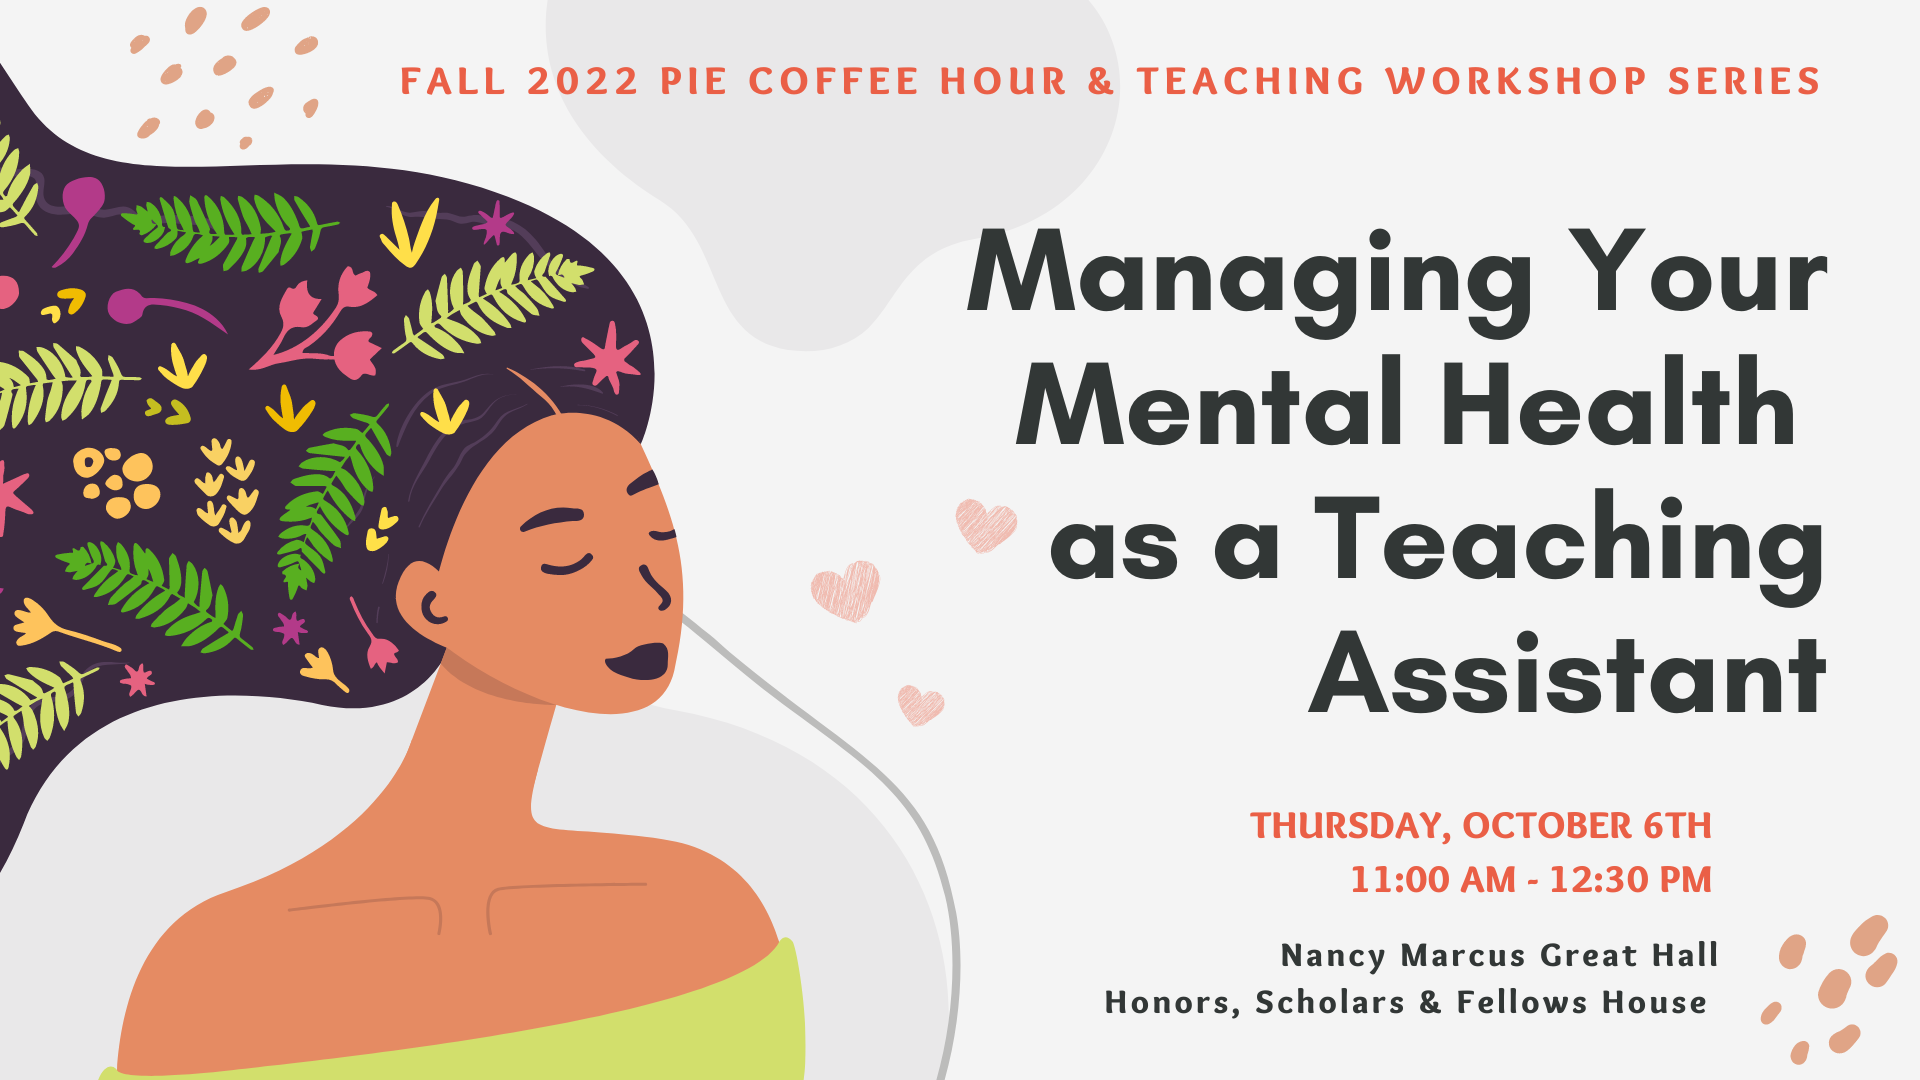 Managing Your Mental Health as a Teaching Assistant. Thursday, October 6th. 11:00 AM - 12:30 PM. Nancy Marcus Great Hall. Honors, Scholars & Fellows House.